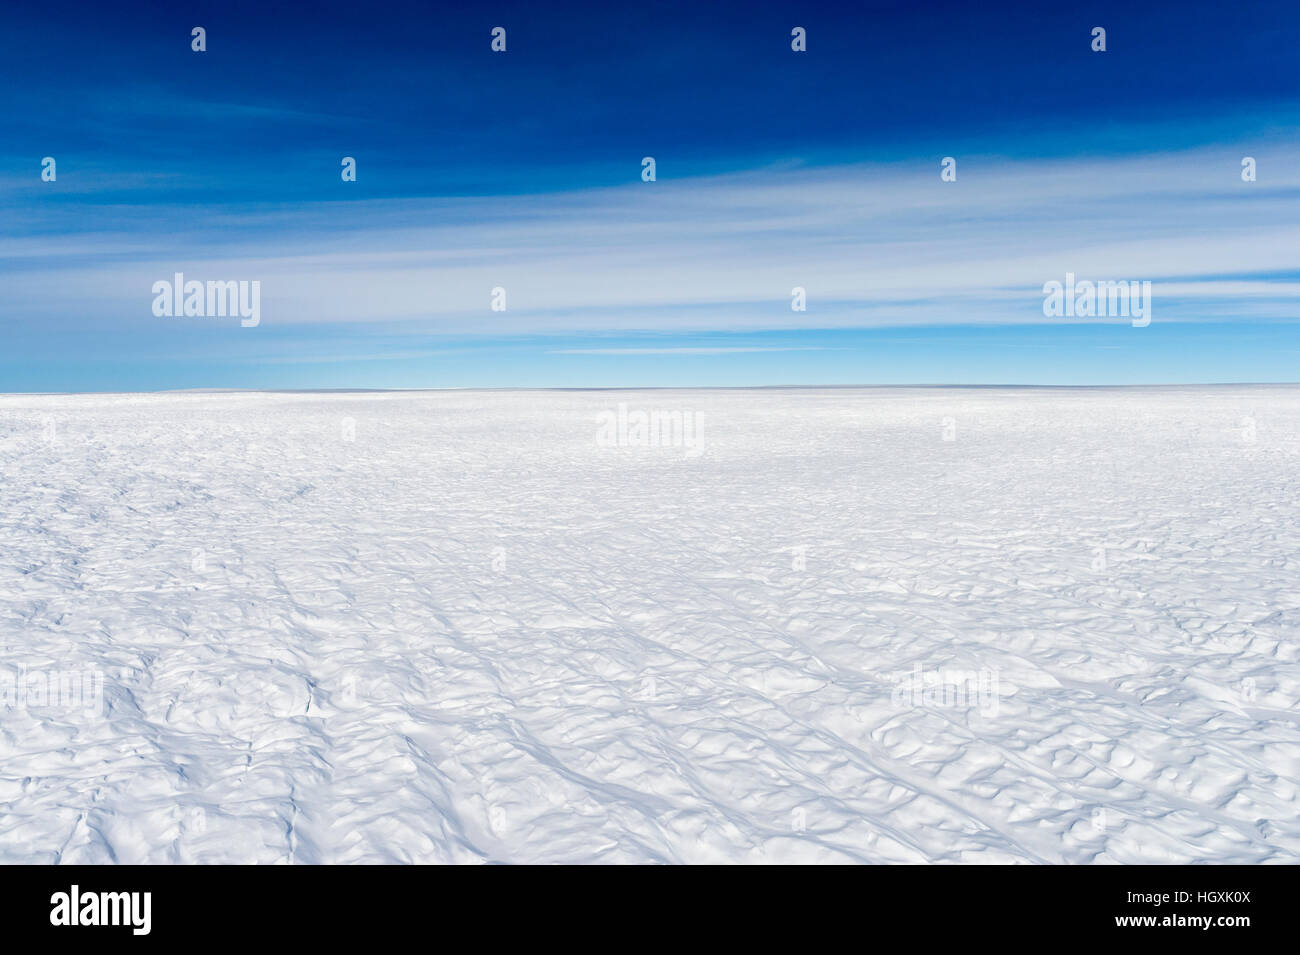 Layers of snow mask deep crevasse on the surface of the vast Greenland Ice Sheet plain. Stock Photo